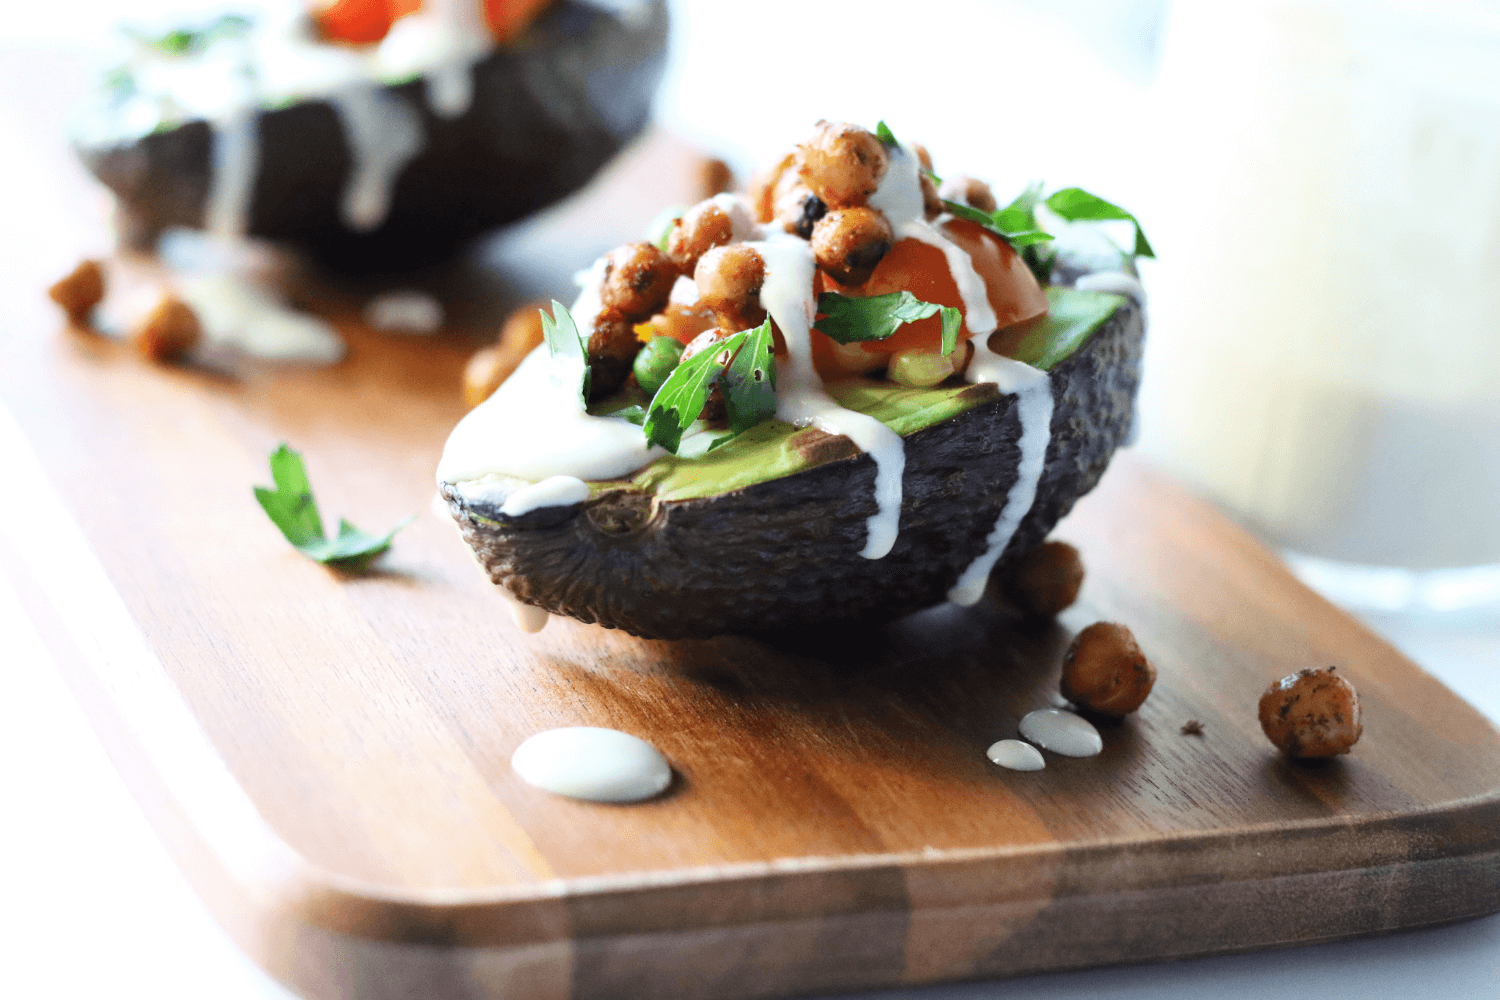 20 Meal Ideas Your Clients Can Grill This Summer: Grilled Chickpea Stuffed Avocados